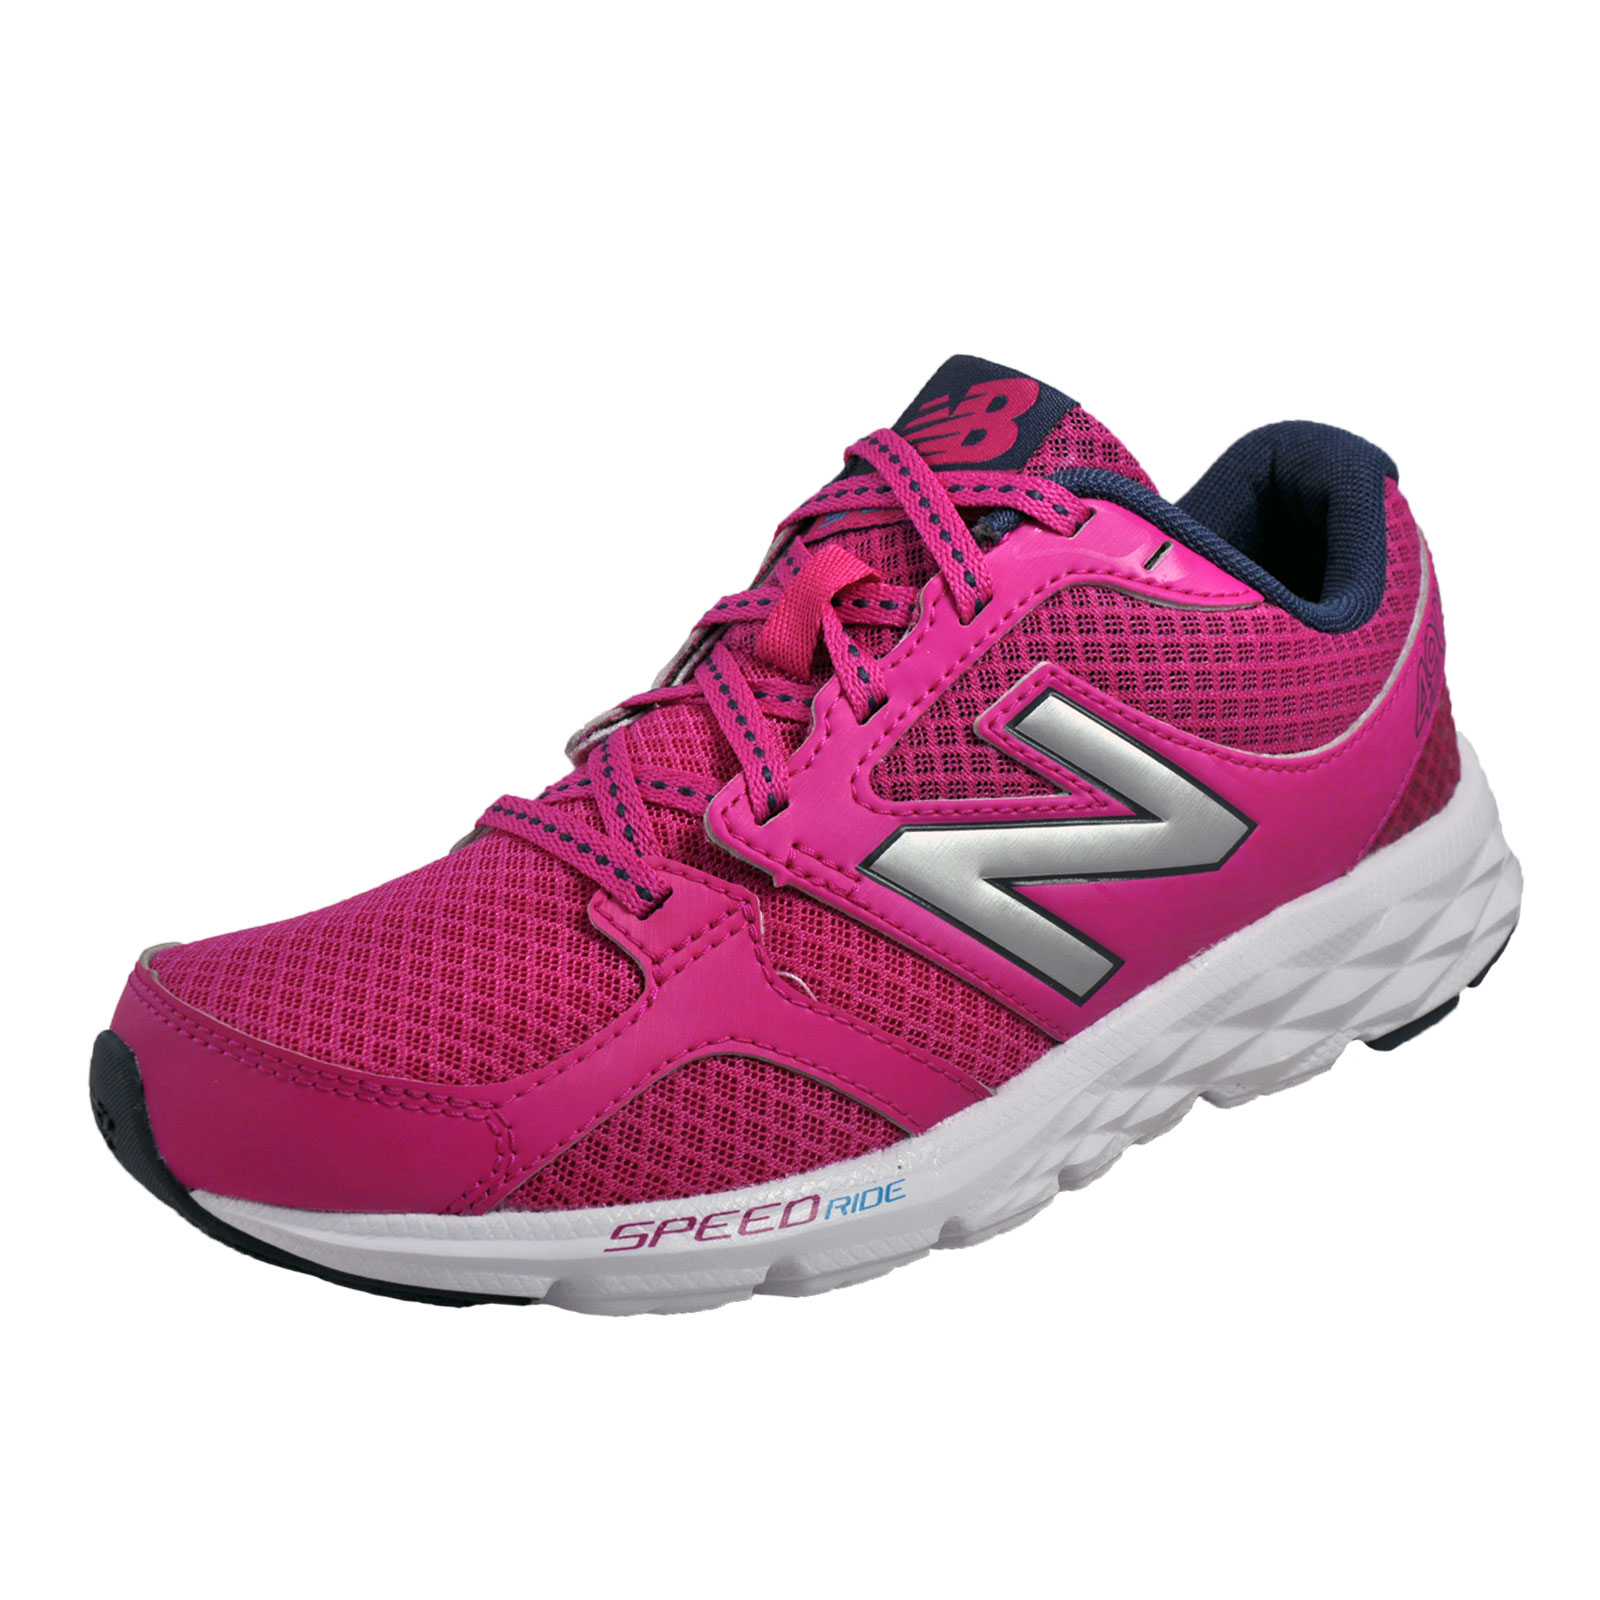 New Balance 490 v3 Womens Running Shoes Fitness Gym Trainers | eBay